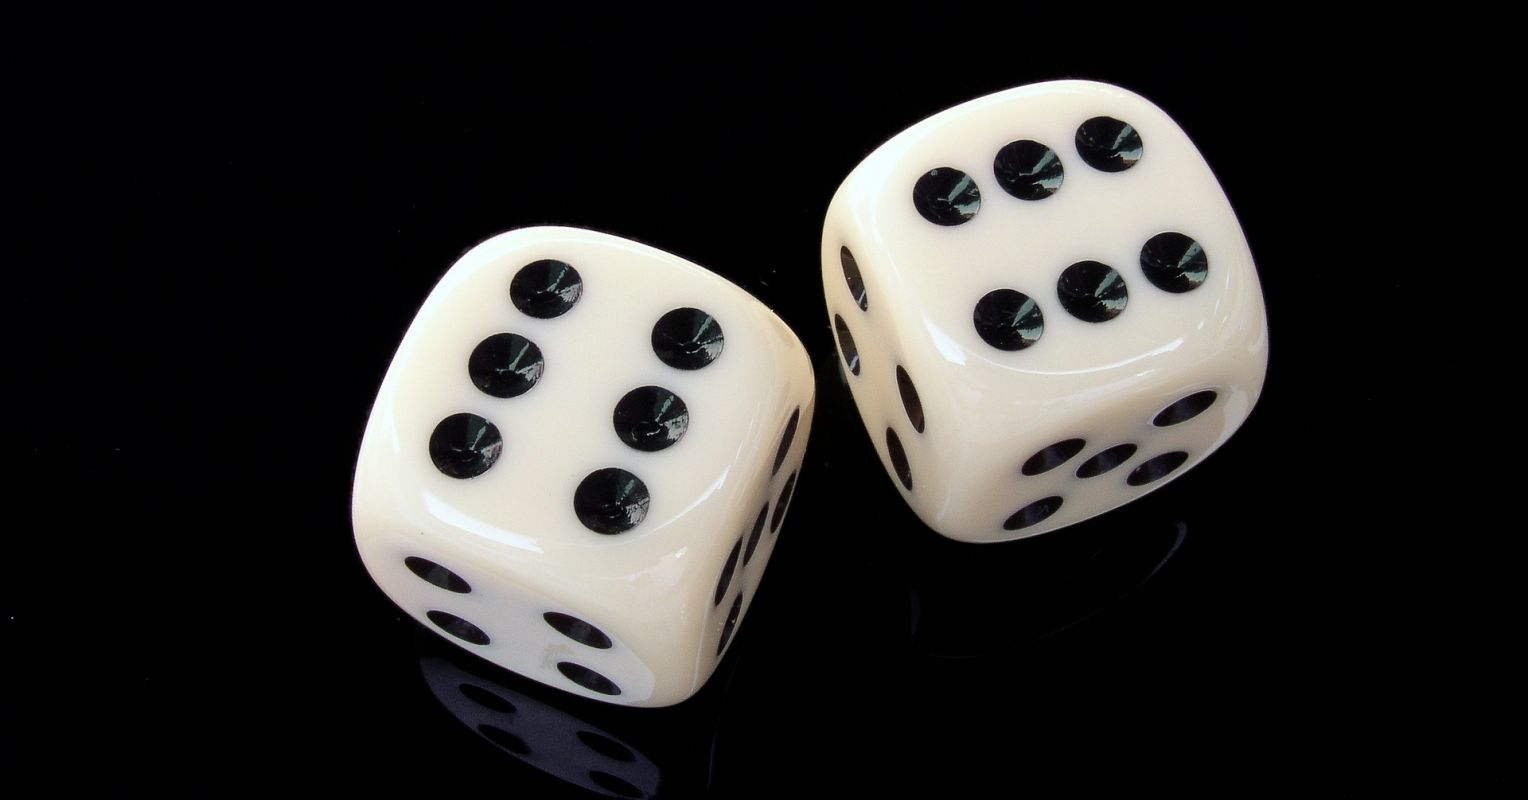 Should You Let the Dice Decide? | Psychology Today New Zealand